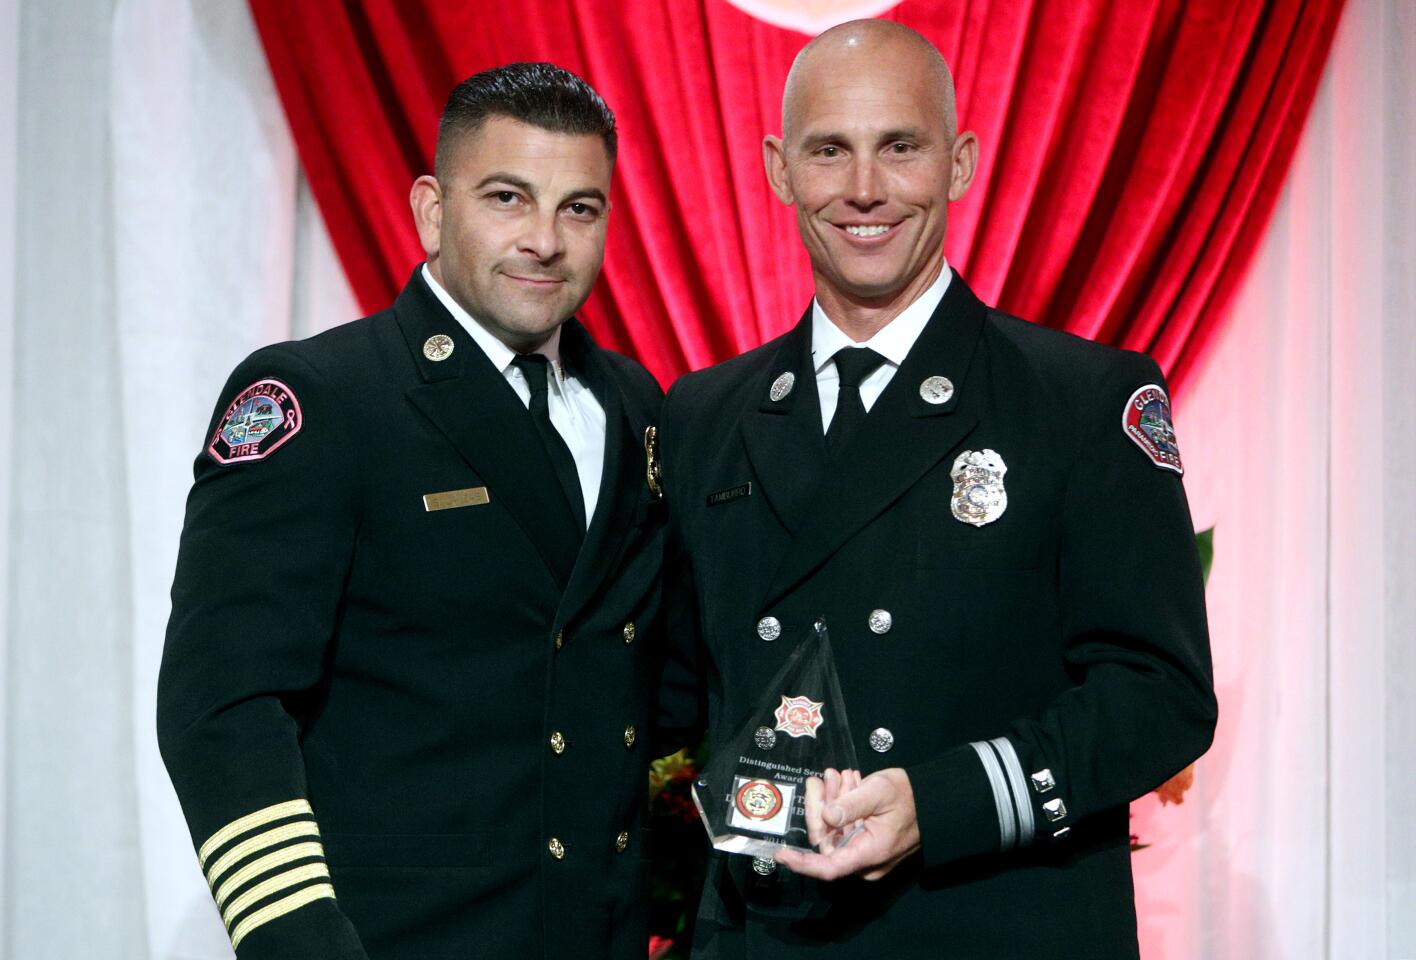 Glendale Fire Department chief Silvio Lanzas, left, awarded the Distinguished Service Award to GFD fire captain paramedic Derek Tamburro, at the City of Glendale Fire Department 2019 Awards Luncheon, at the Hilton in Glendale, on Wednesday, Oct. 16, 2019. The event was sponsored by the City of Glendale, the Glendale Fire Dept., the Glendale Fire Foundation and the Glendale Sunrise Rotary.